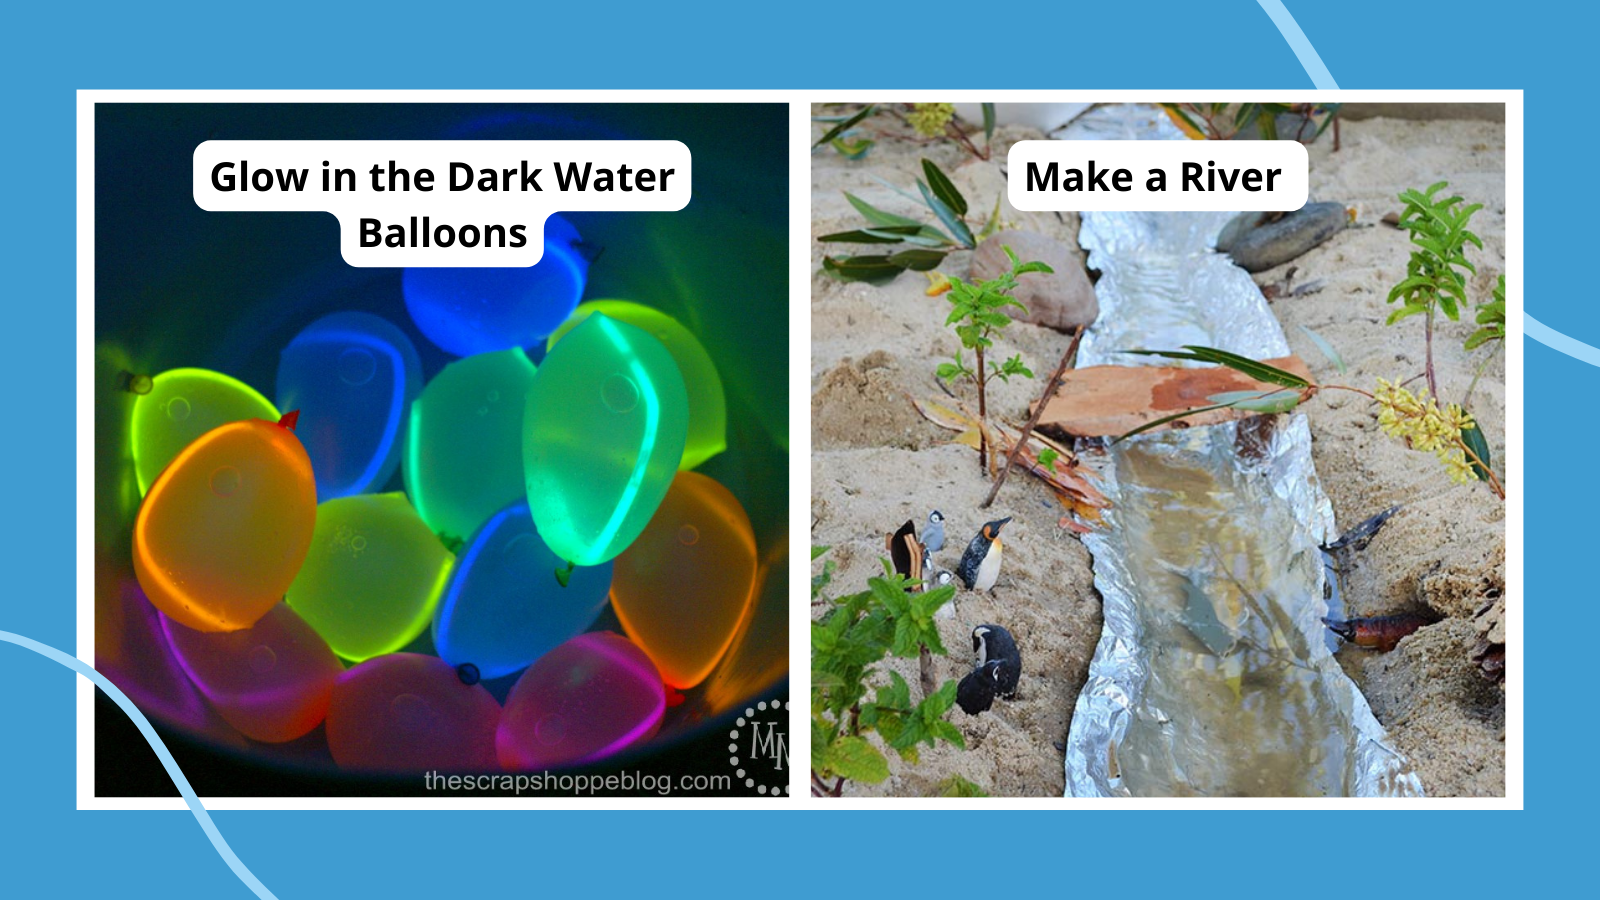 ideas for water activities glow in the dark water balloons and a river made in a sandbox